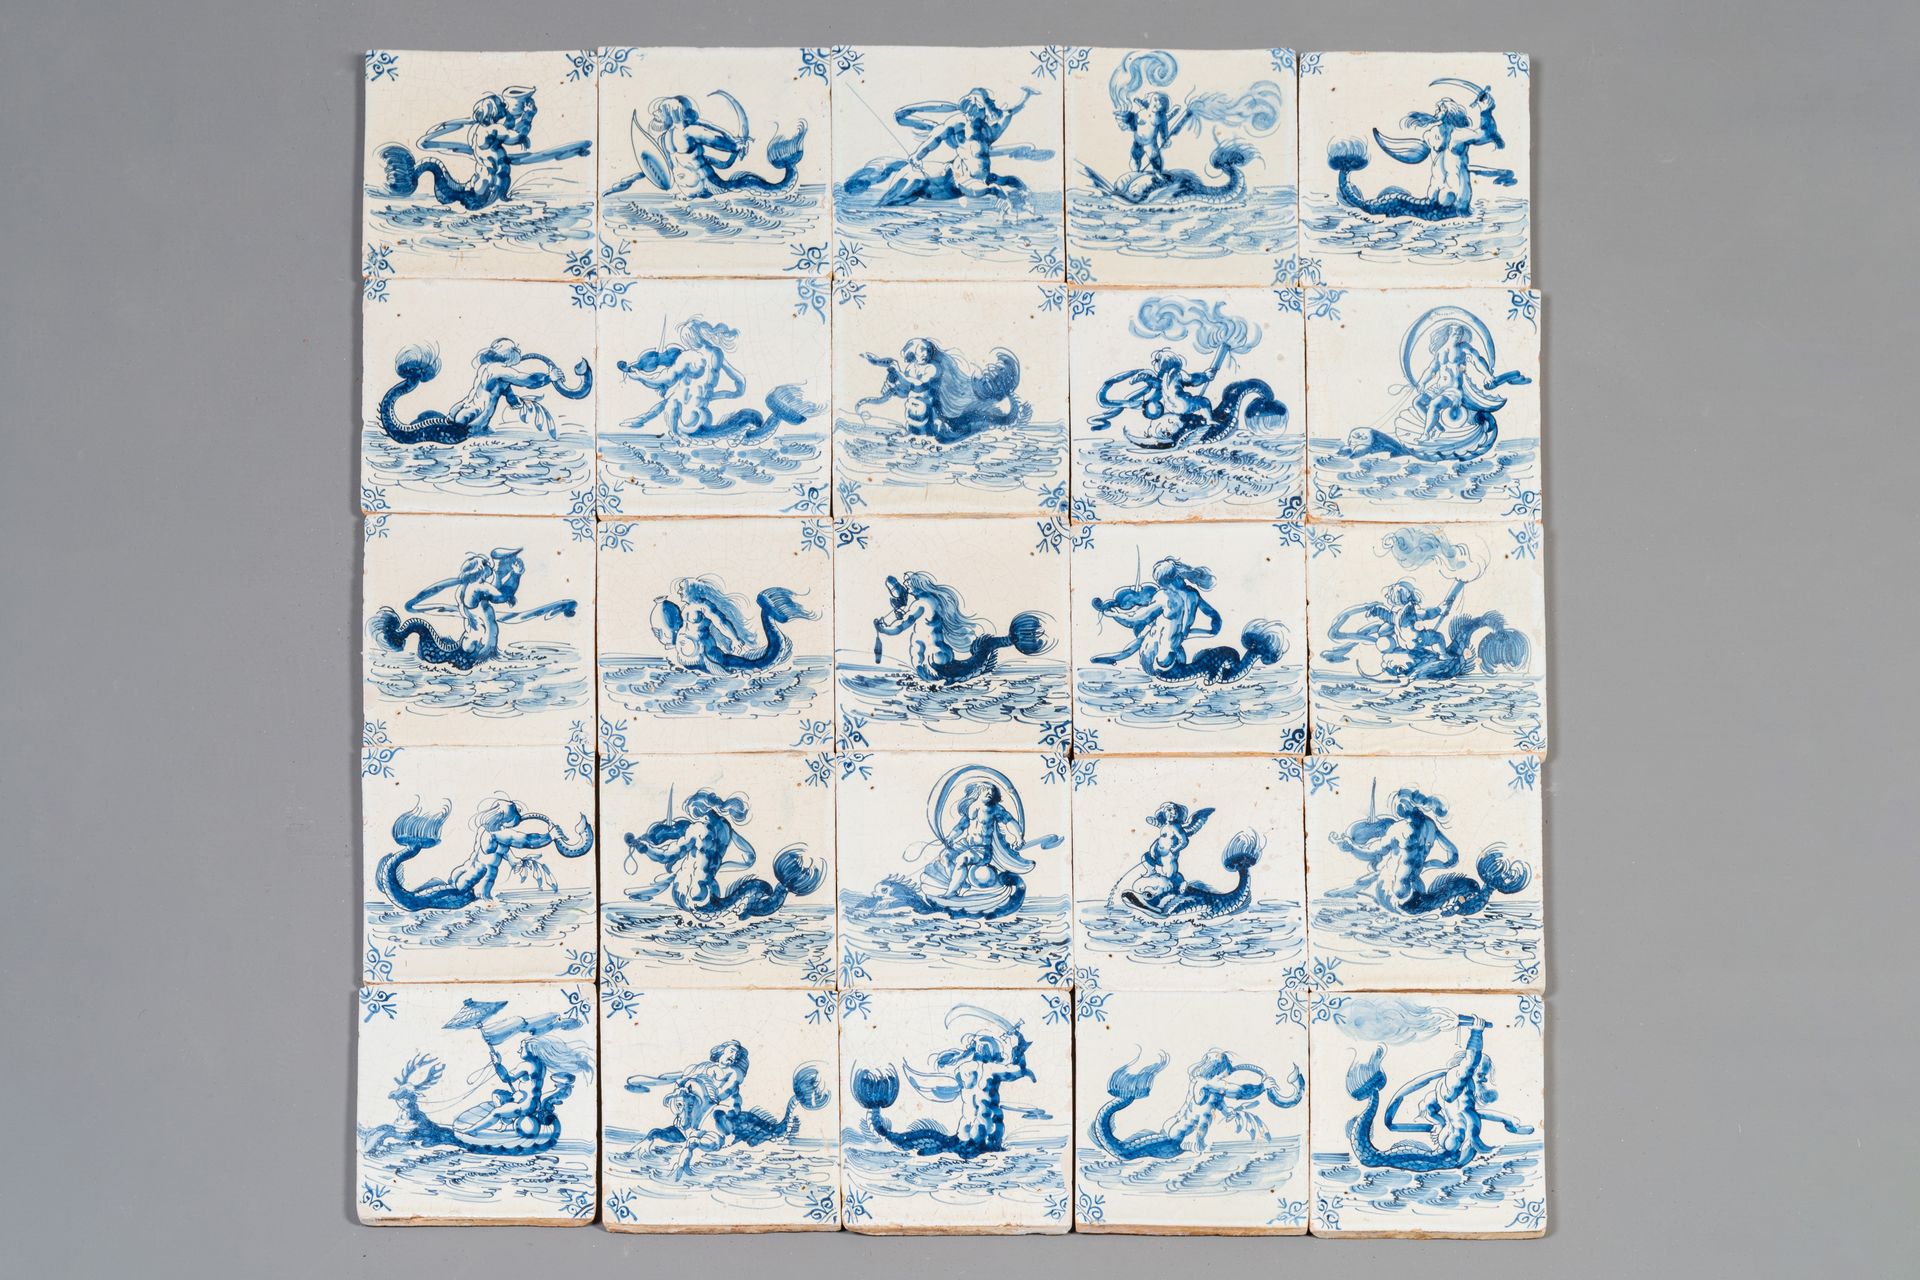 An exceptional set of 25 Dutch Delft blue and white tiles with fine sea monsters&hellip;